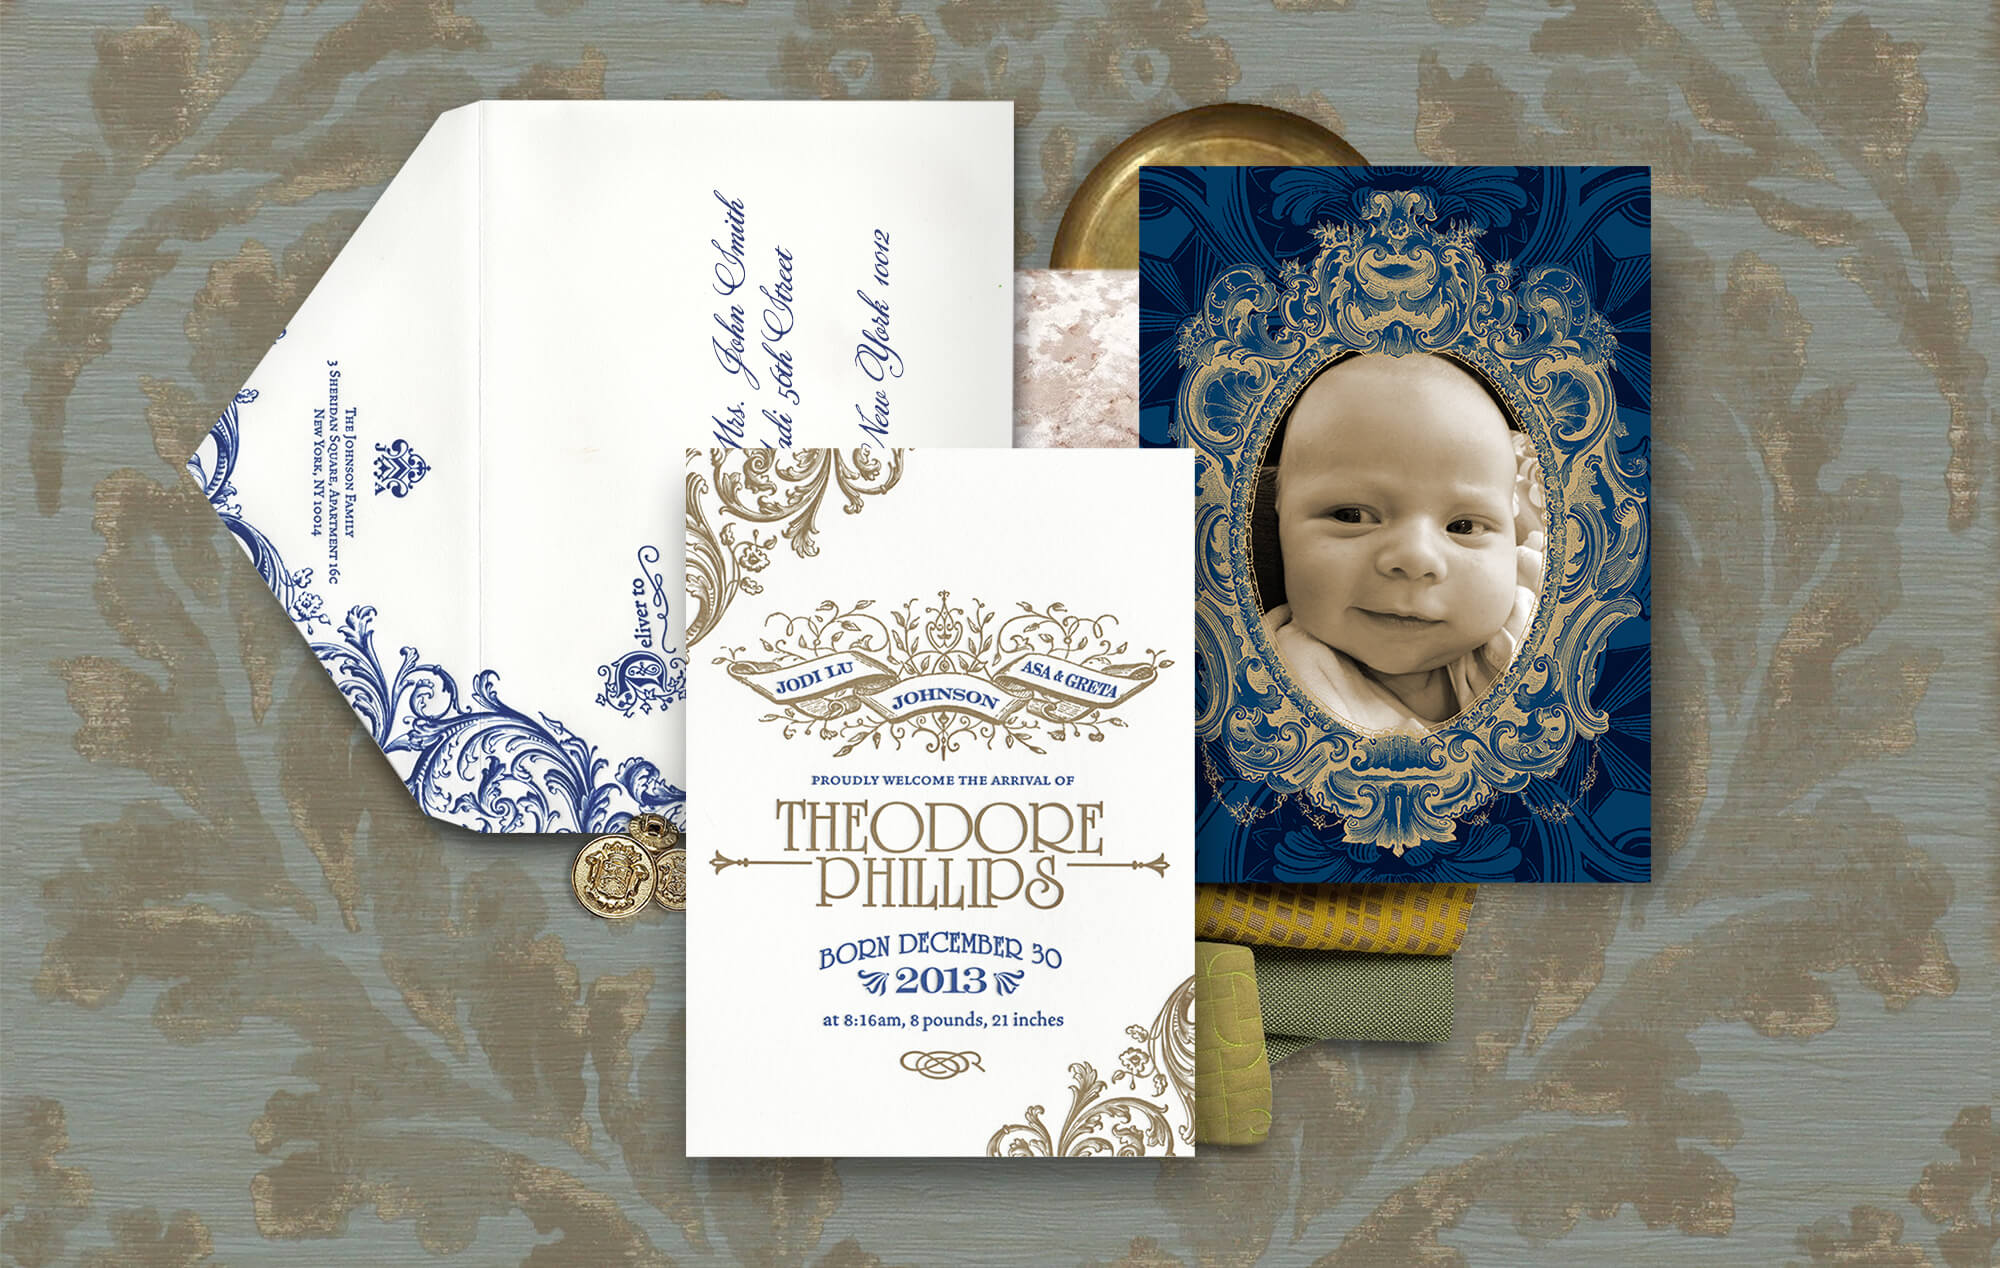 Elegant baby announcement with ornate scrollwork